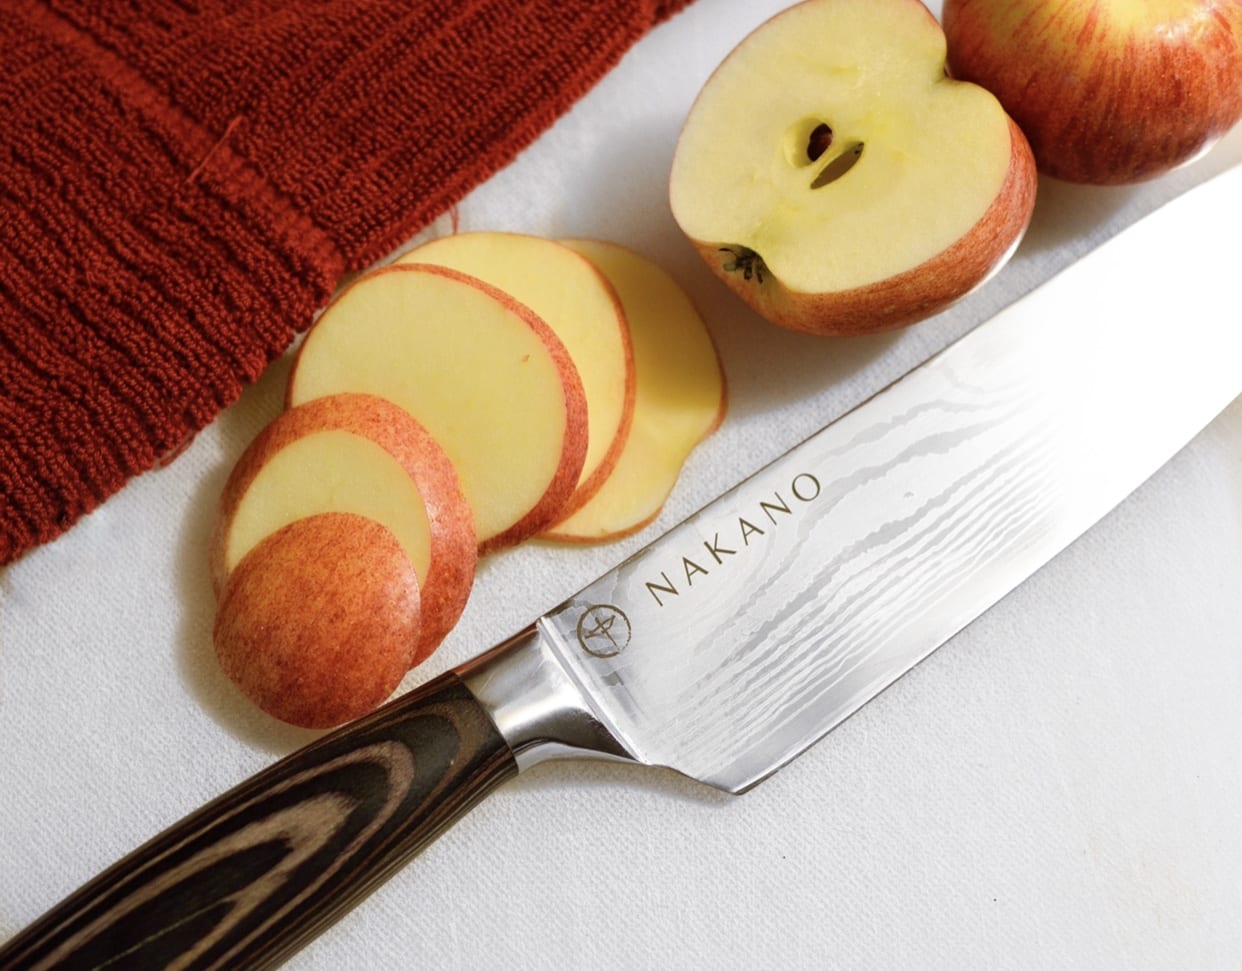 Sharpest Knives Recommend - Paudin